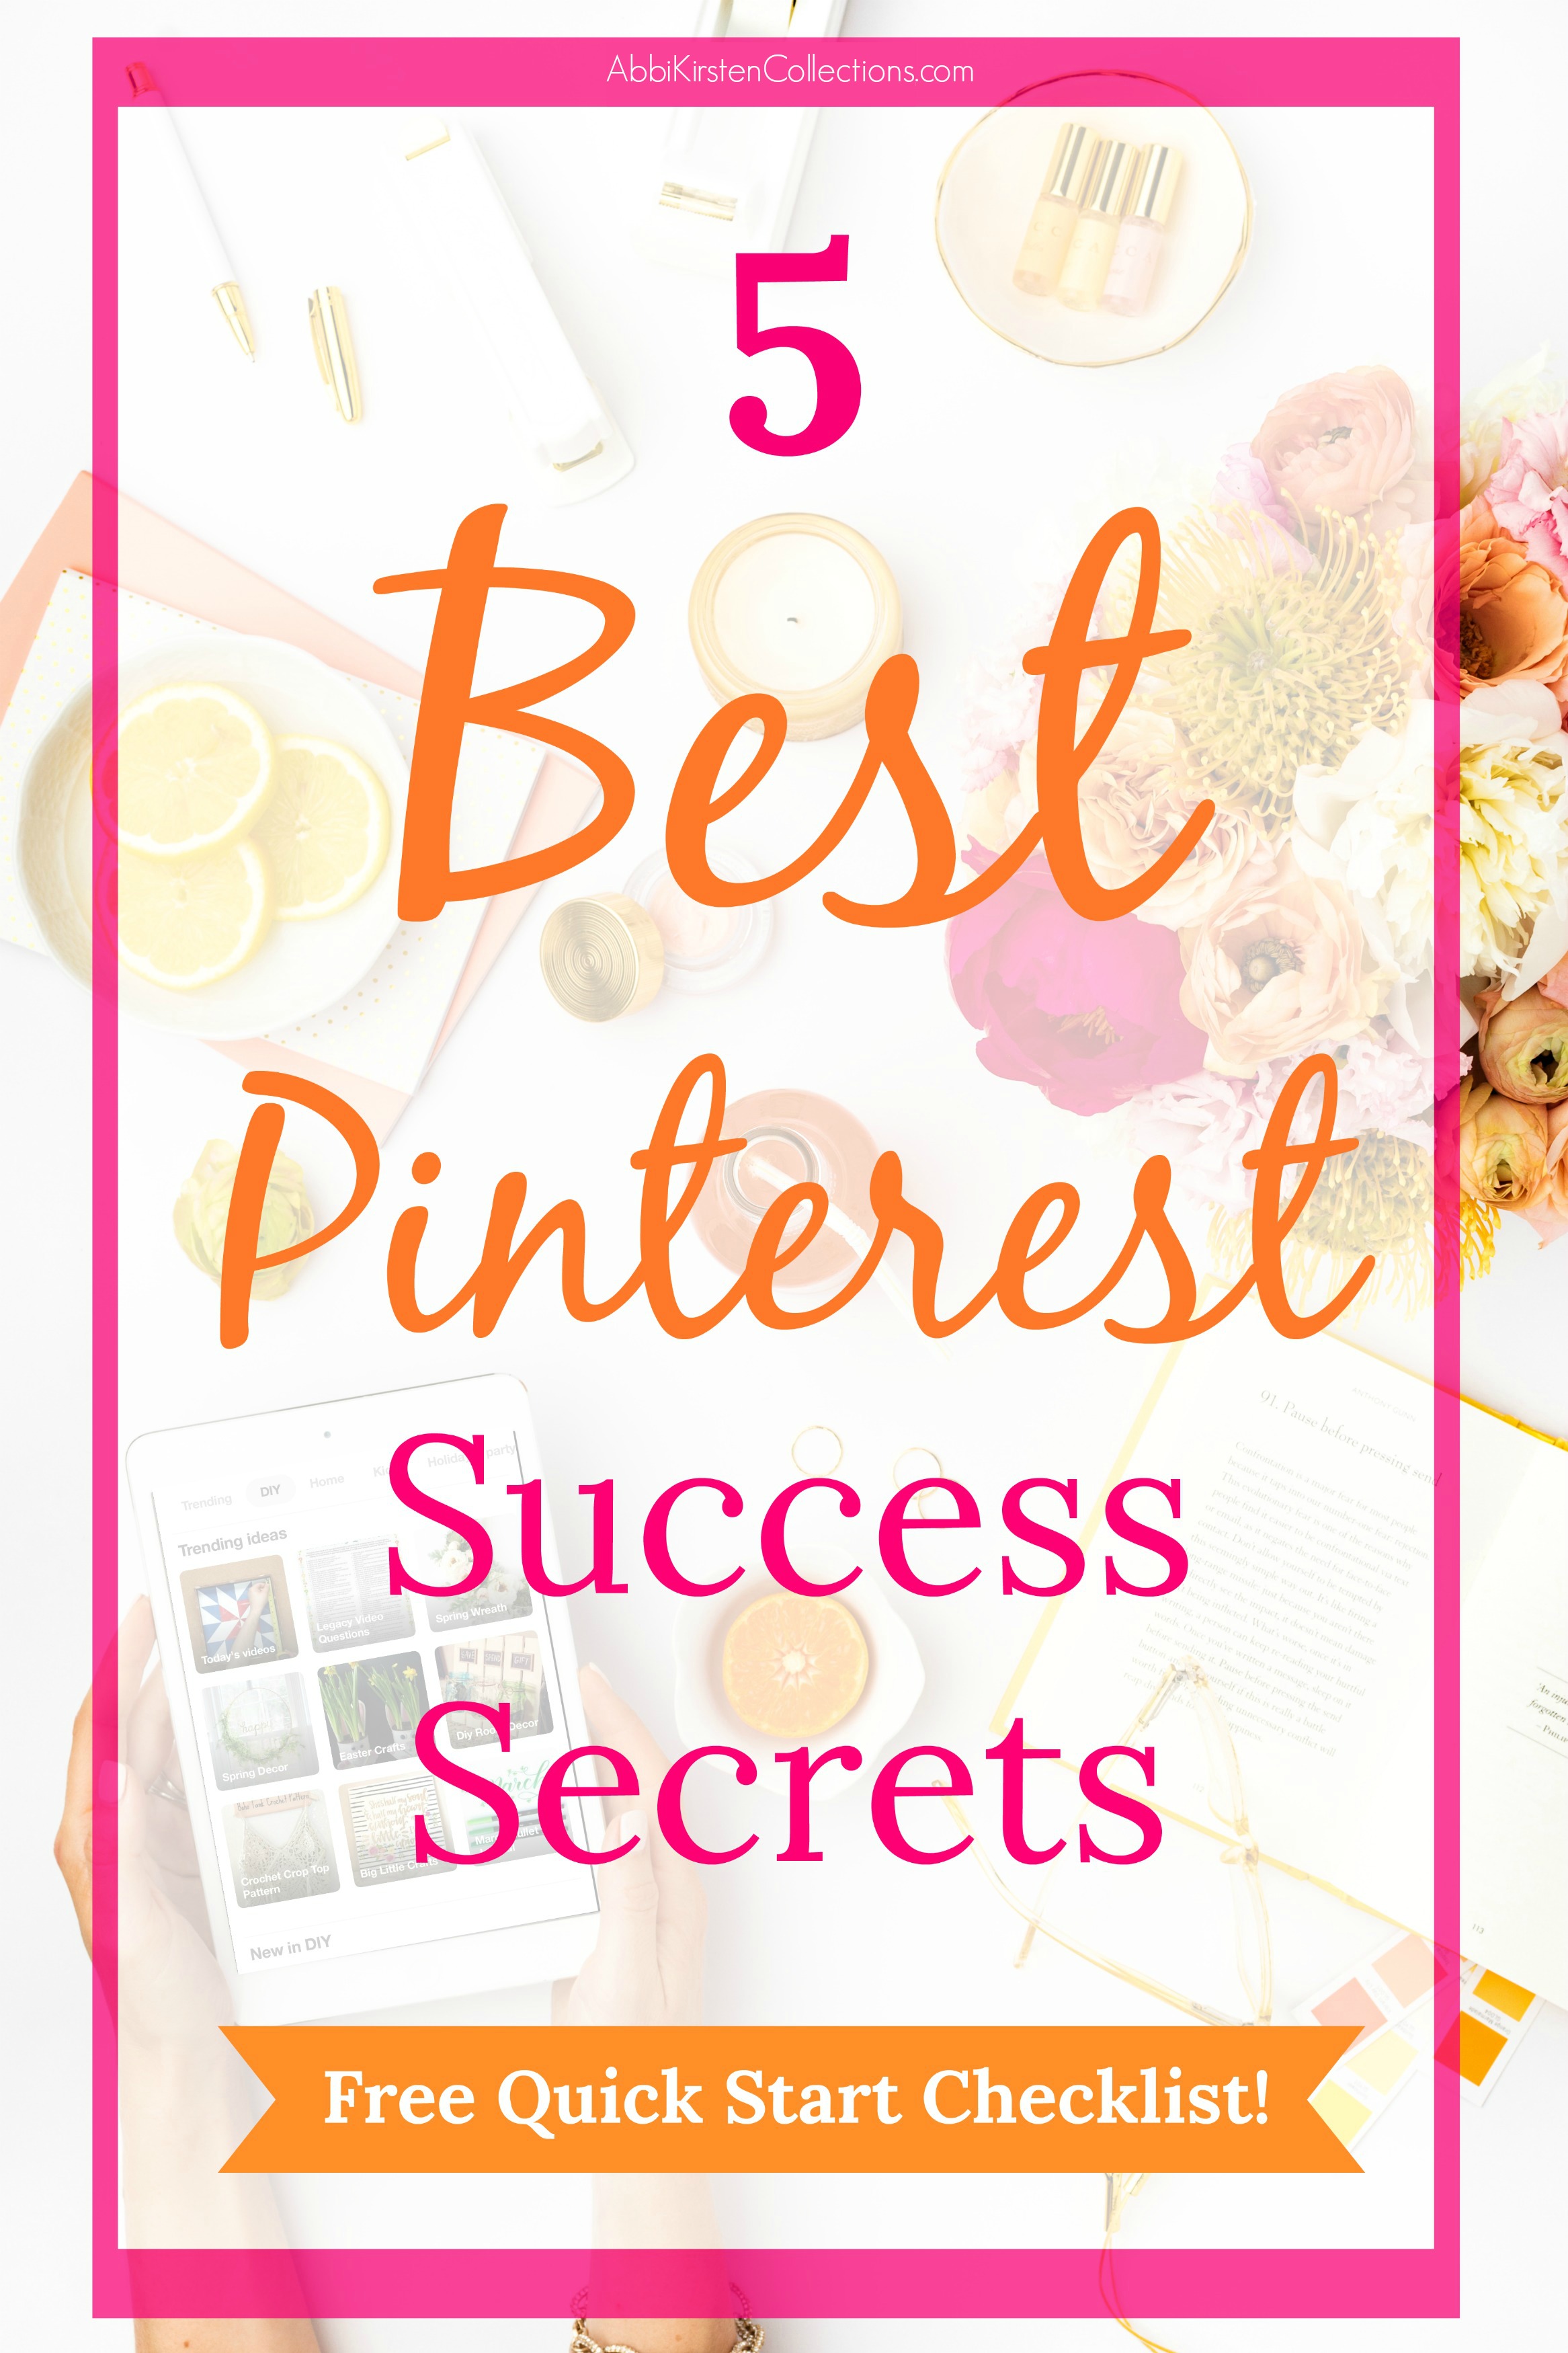 How to Use Pinterest to Market Your Business: 5 Best Tips to Success